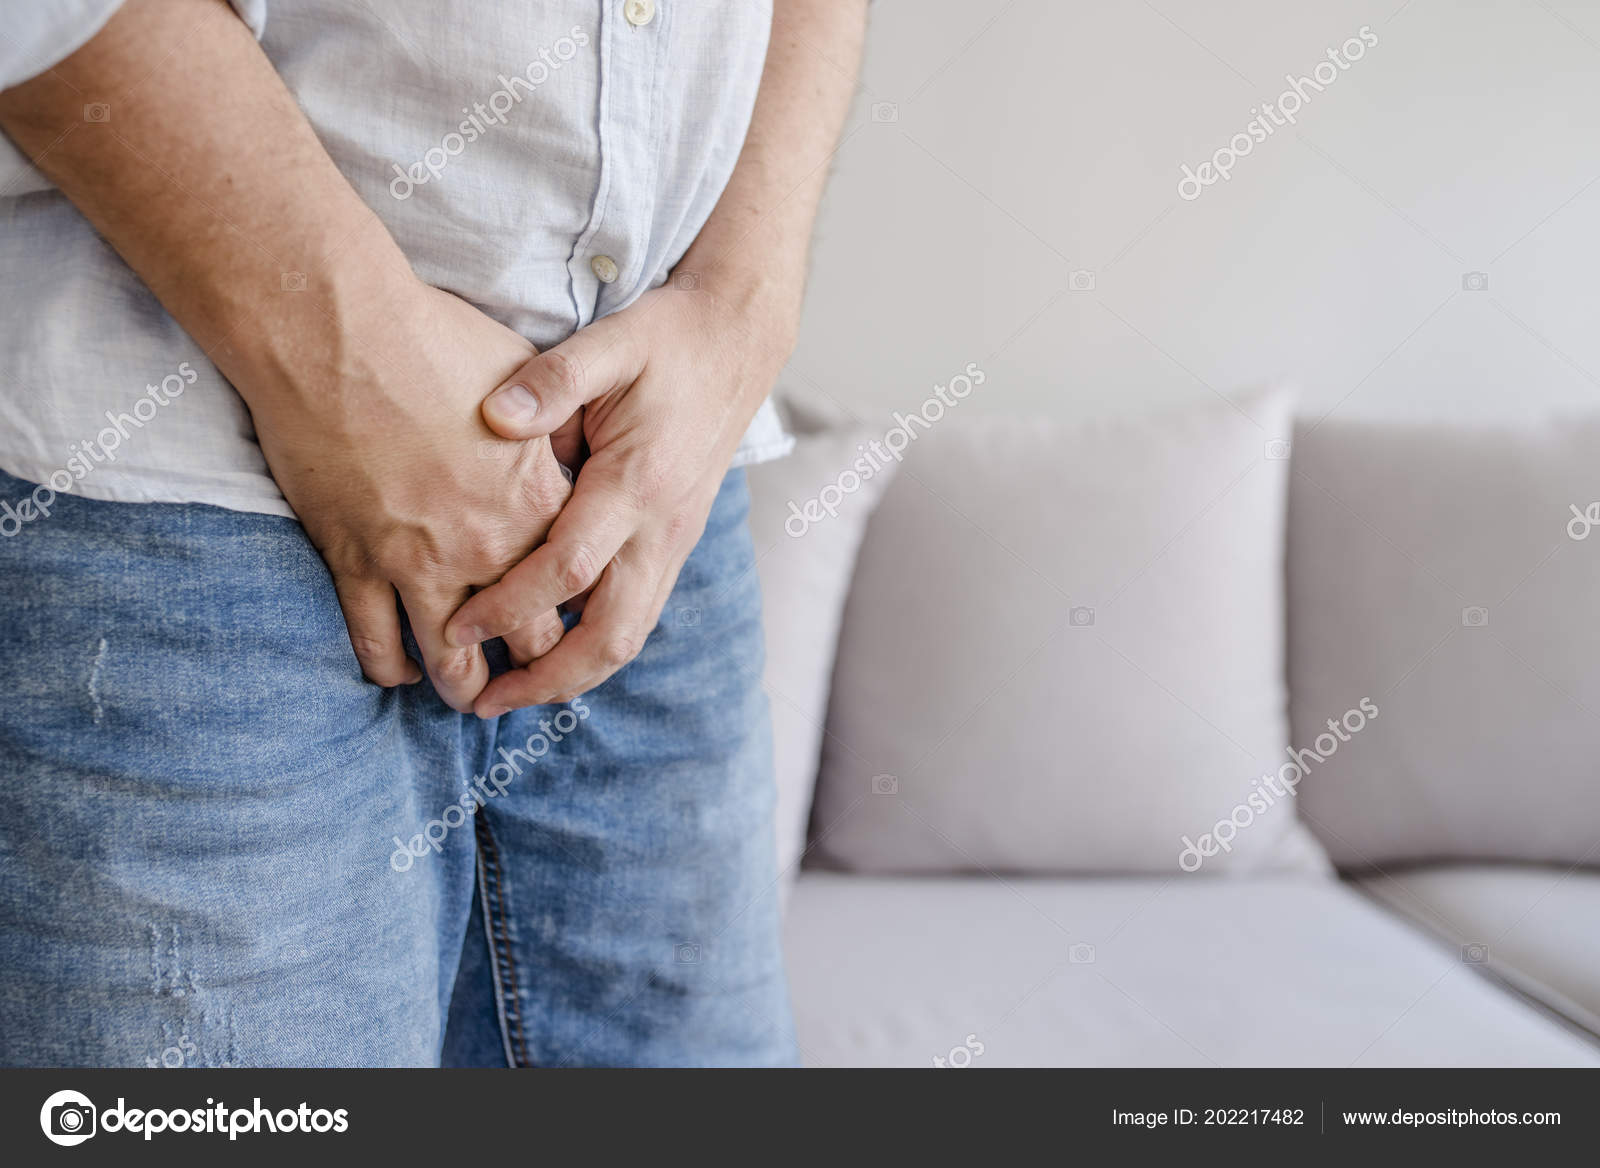 Man Hands Holding His Crotch Wants Pee Urinary Incontinence Concept Stock  Photo by ©dragana.stock@gmail.com 202217482